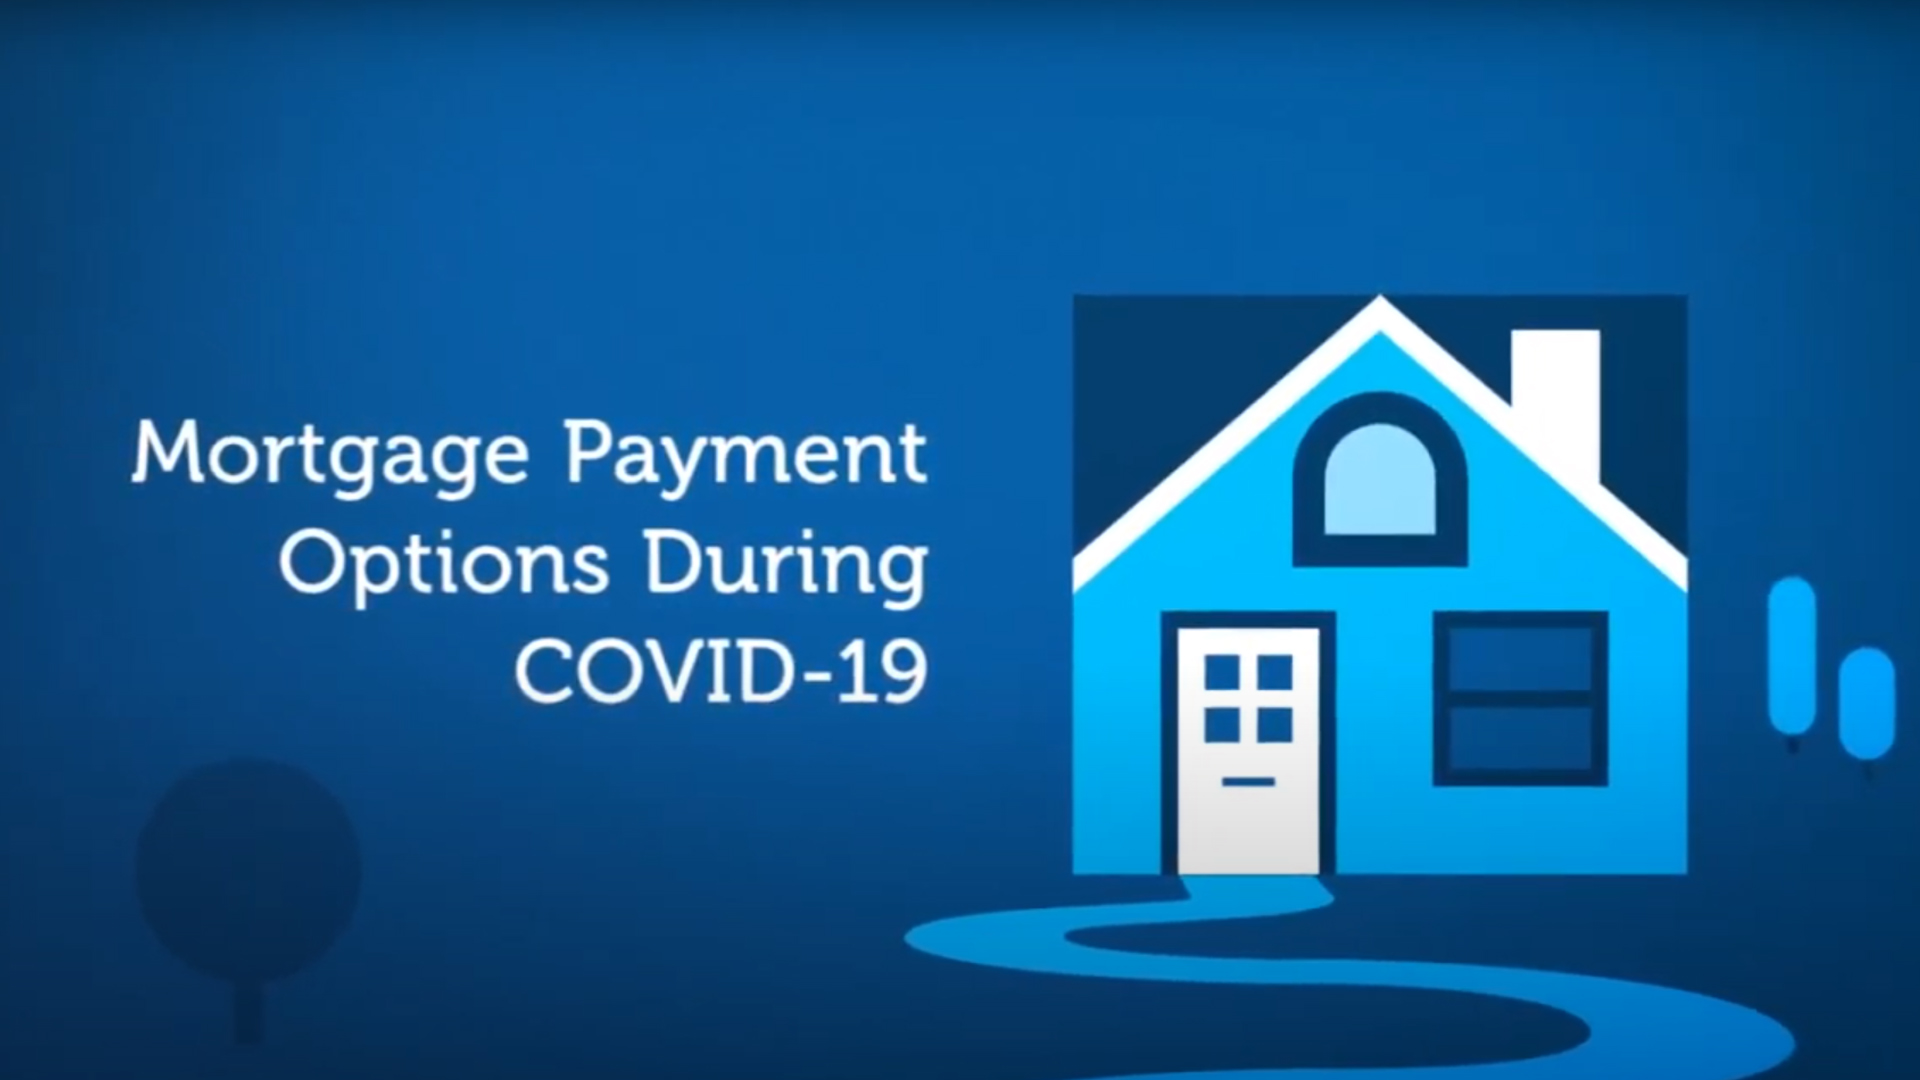 Mortgage Payment Options During COVID-19